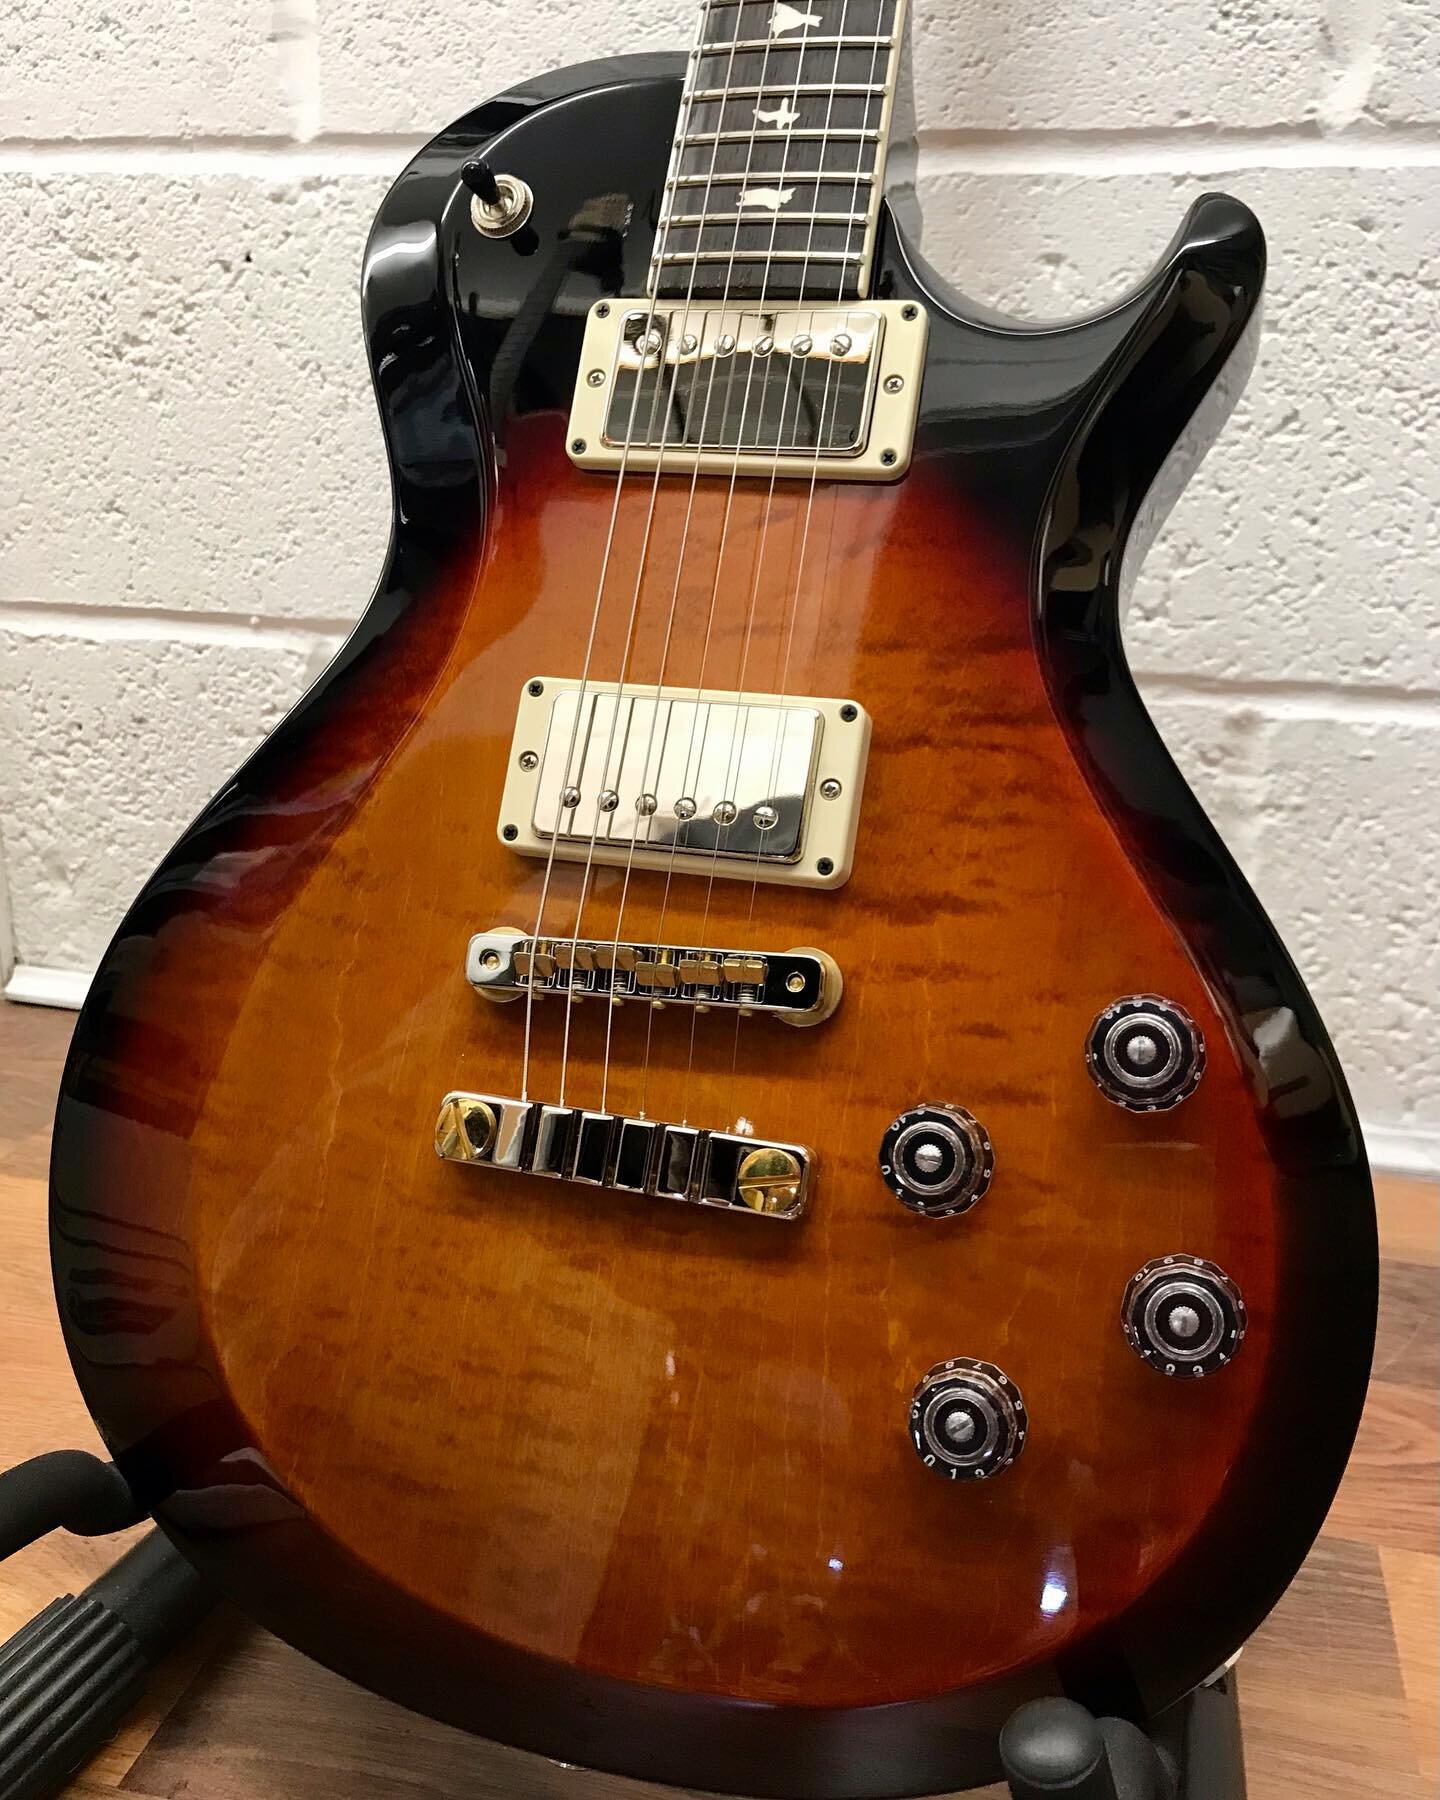 💥Here&rsquo;s the poll winner 💥 
@prsguitars S2 McCarty 594 Custom Colour Black Sunburst.
The first of its kind through our doors 😍 what do you think? We are in love!